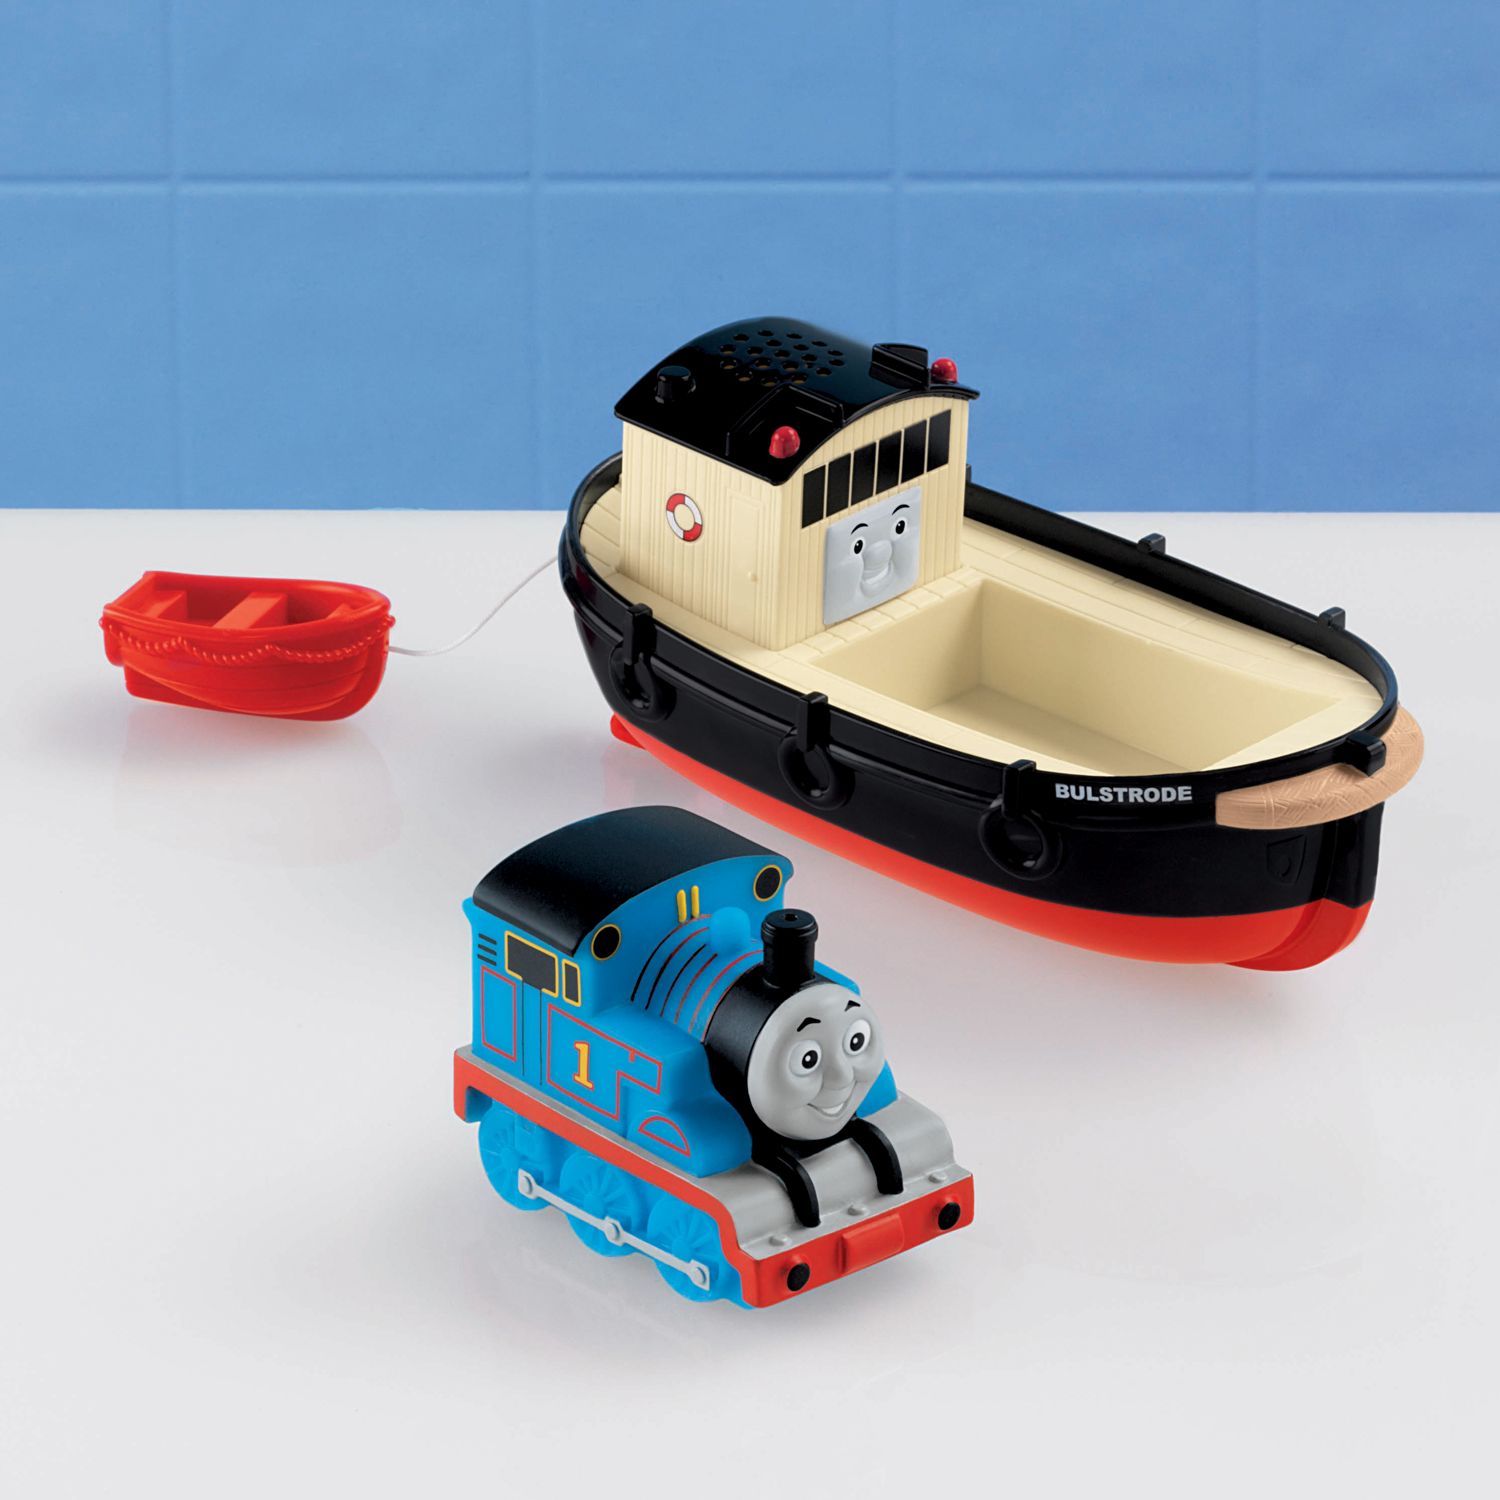 thomas and friends boat